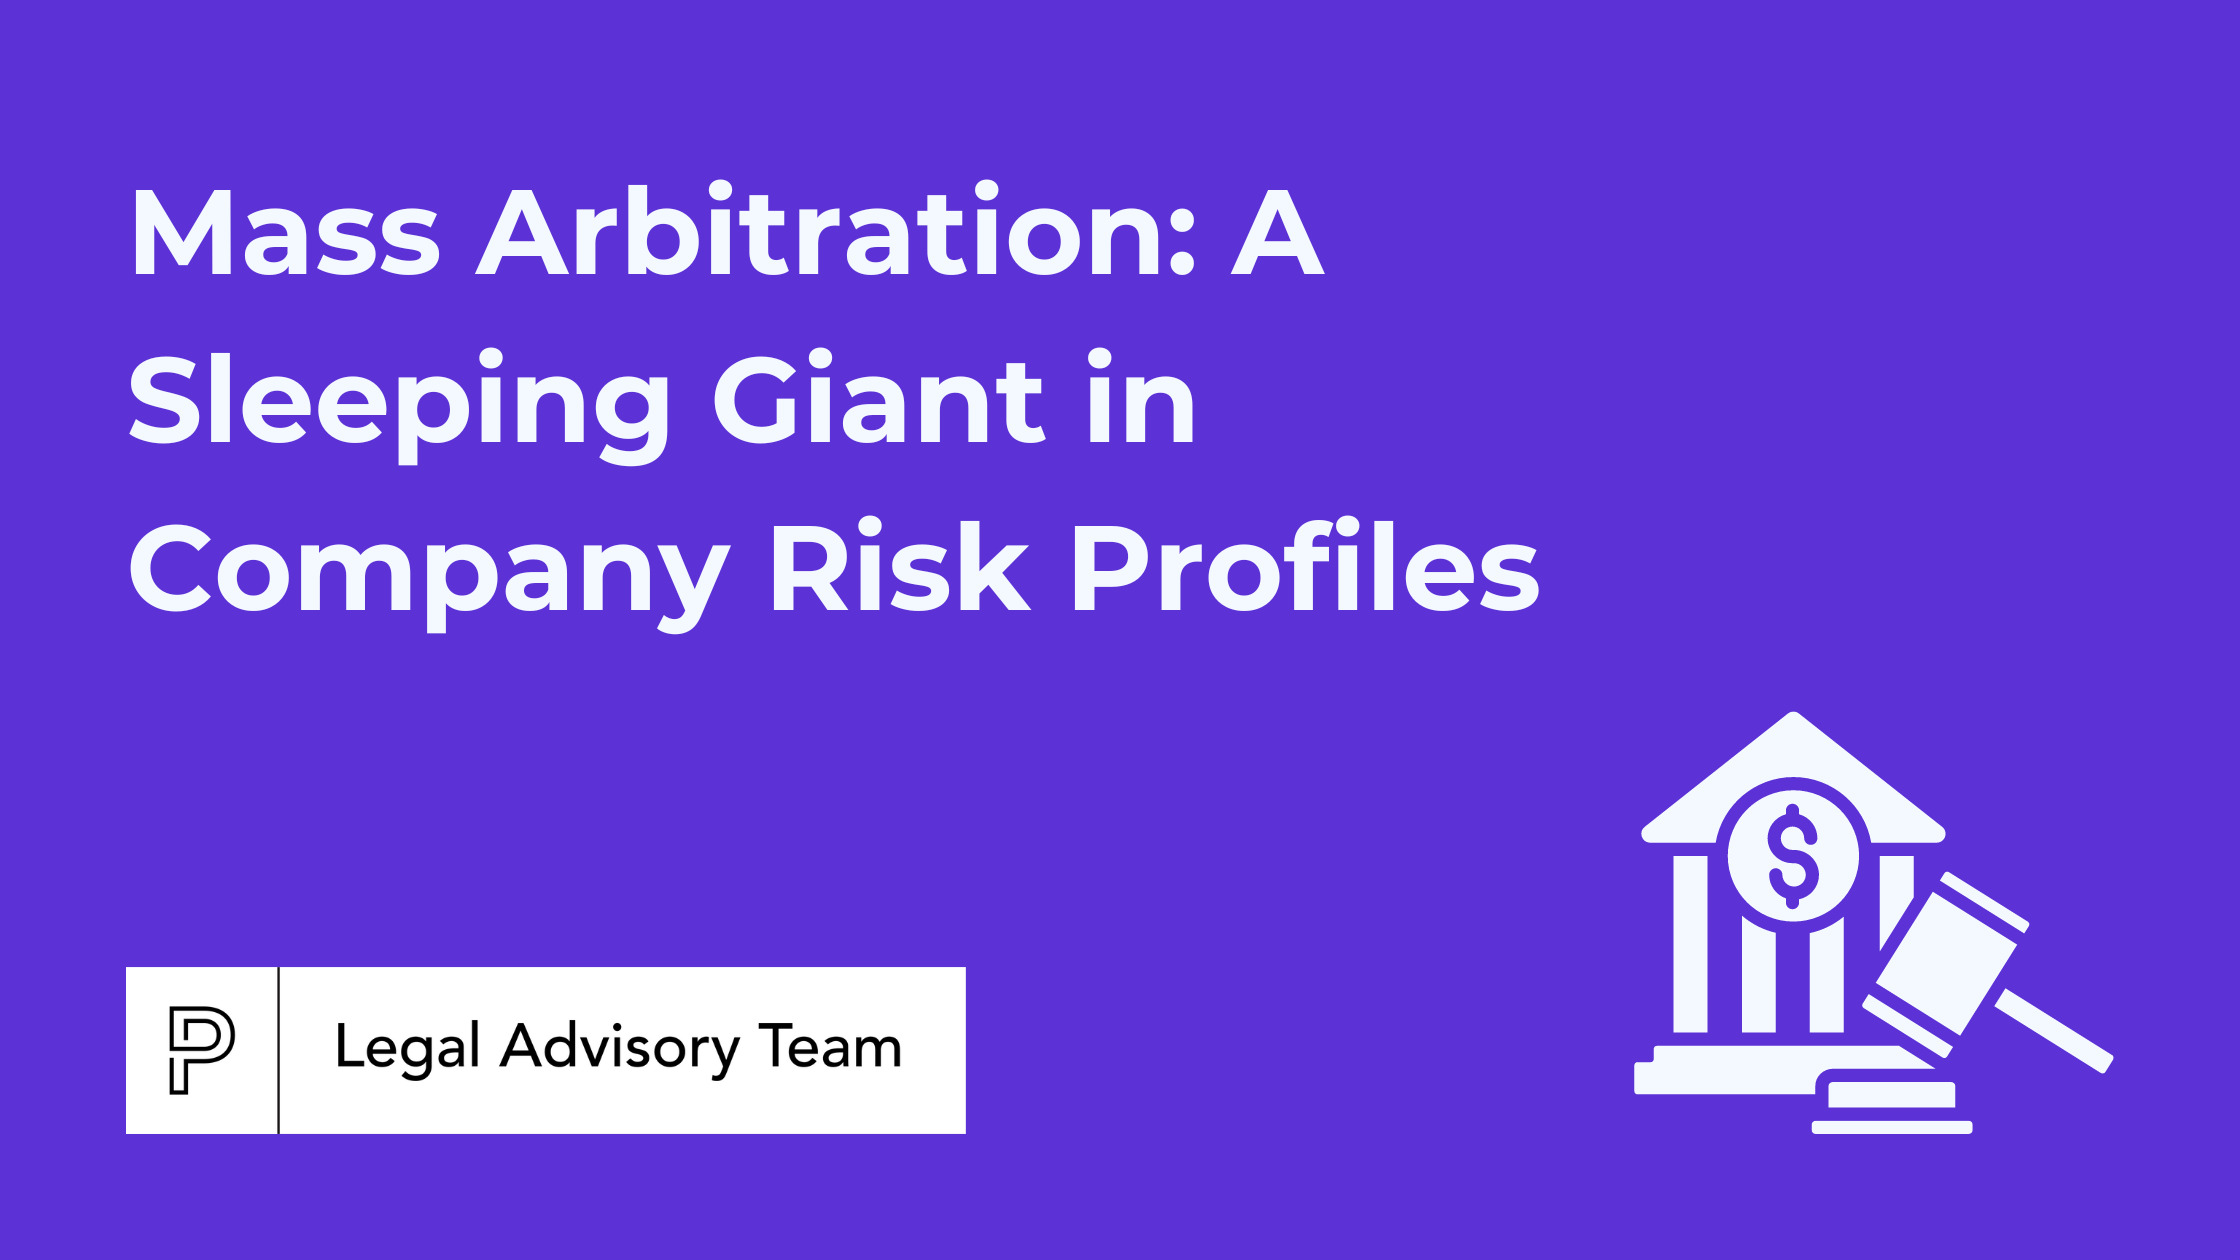 Mass Arbitration: A Sleeping Giant in Company Risk Profiles